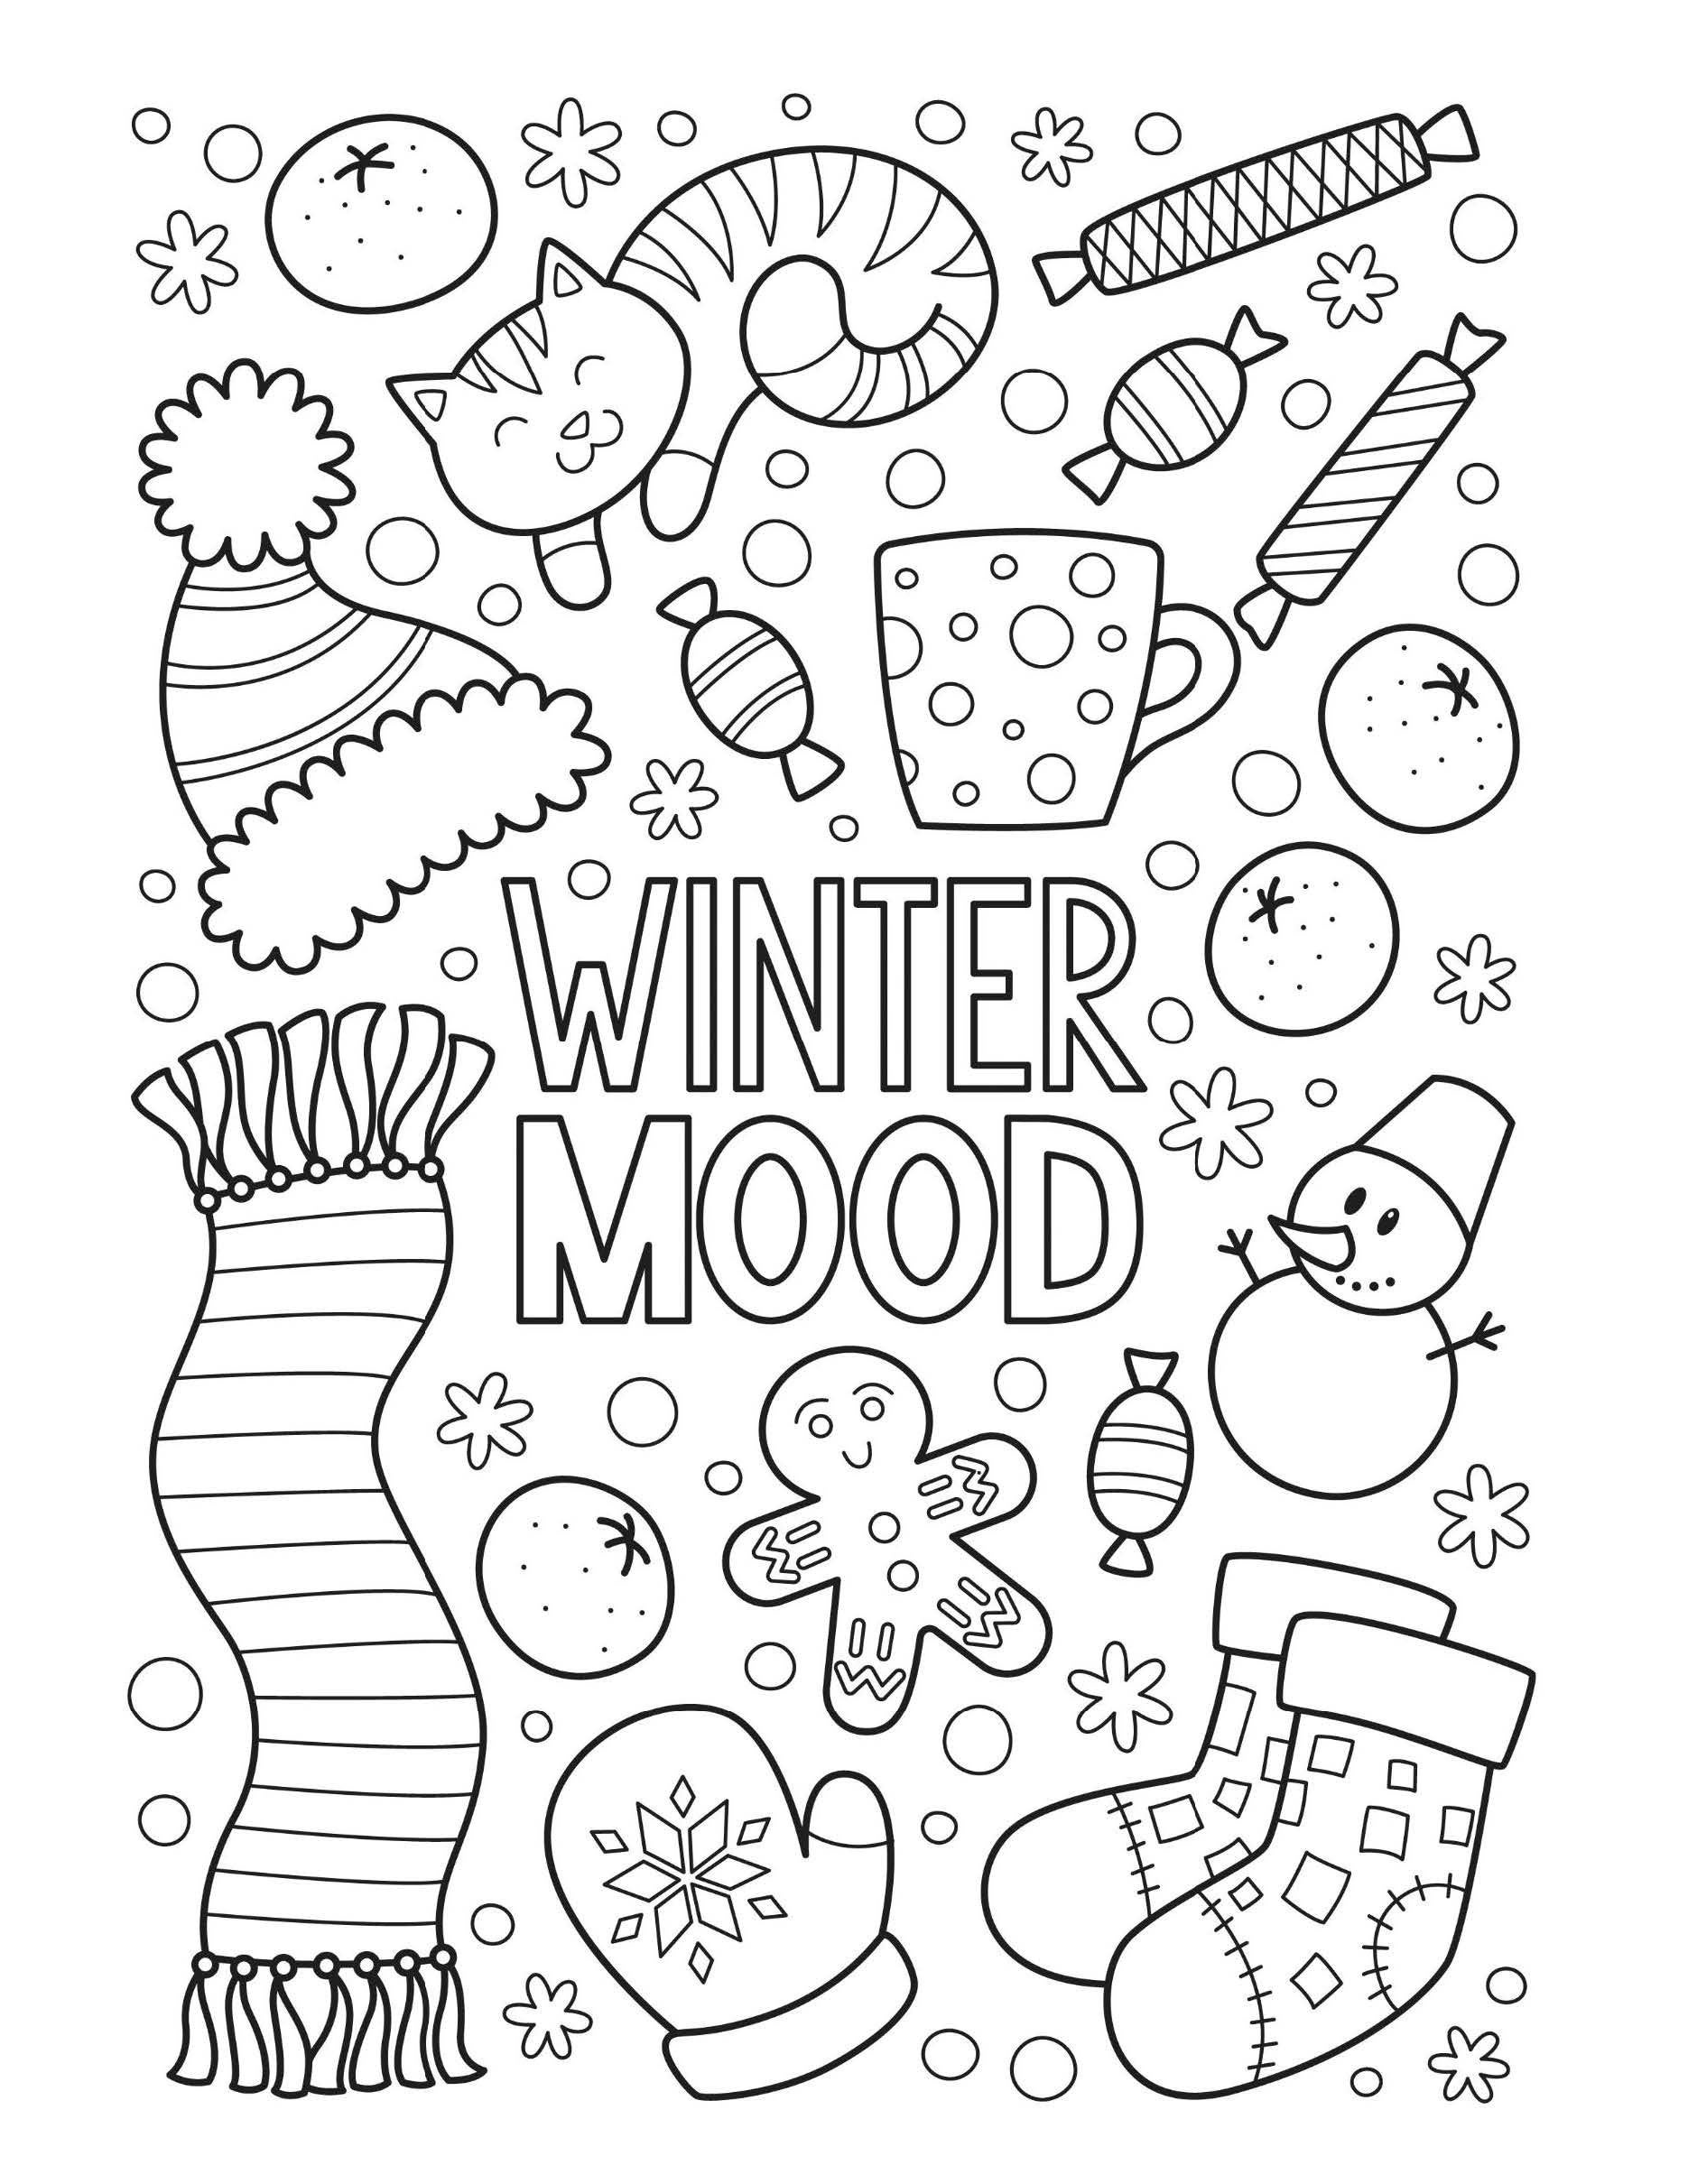 15 Winter Coloring Pages for Kids, Christmas Coloring Pages, Christmas ...